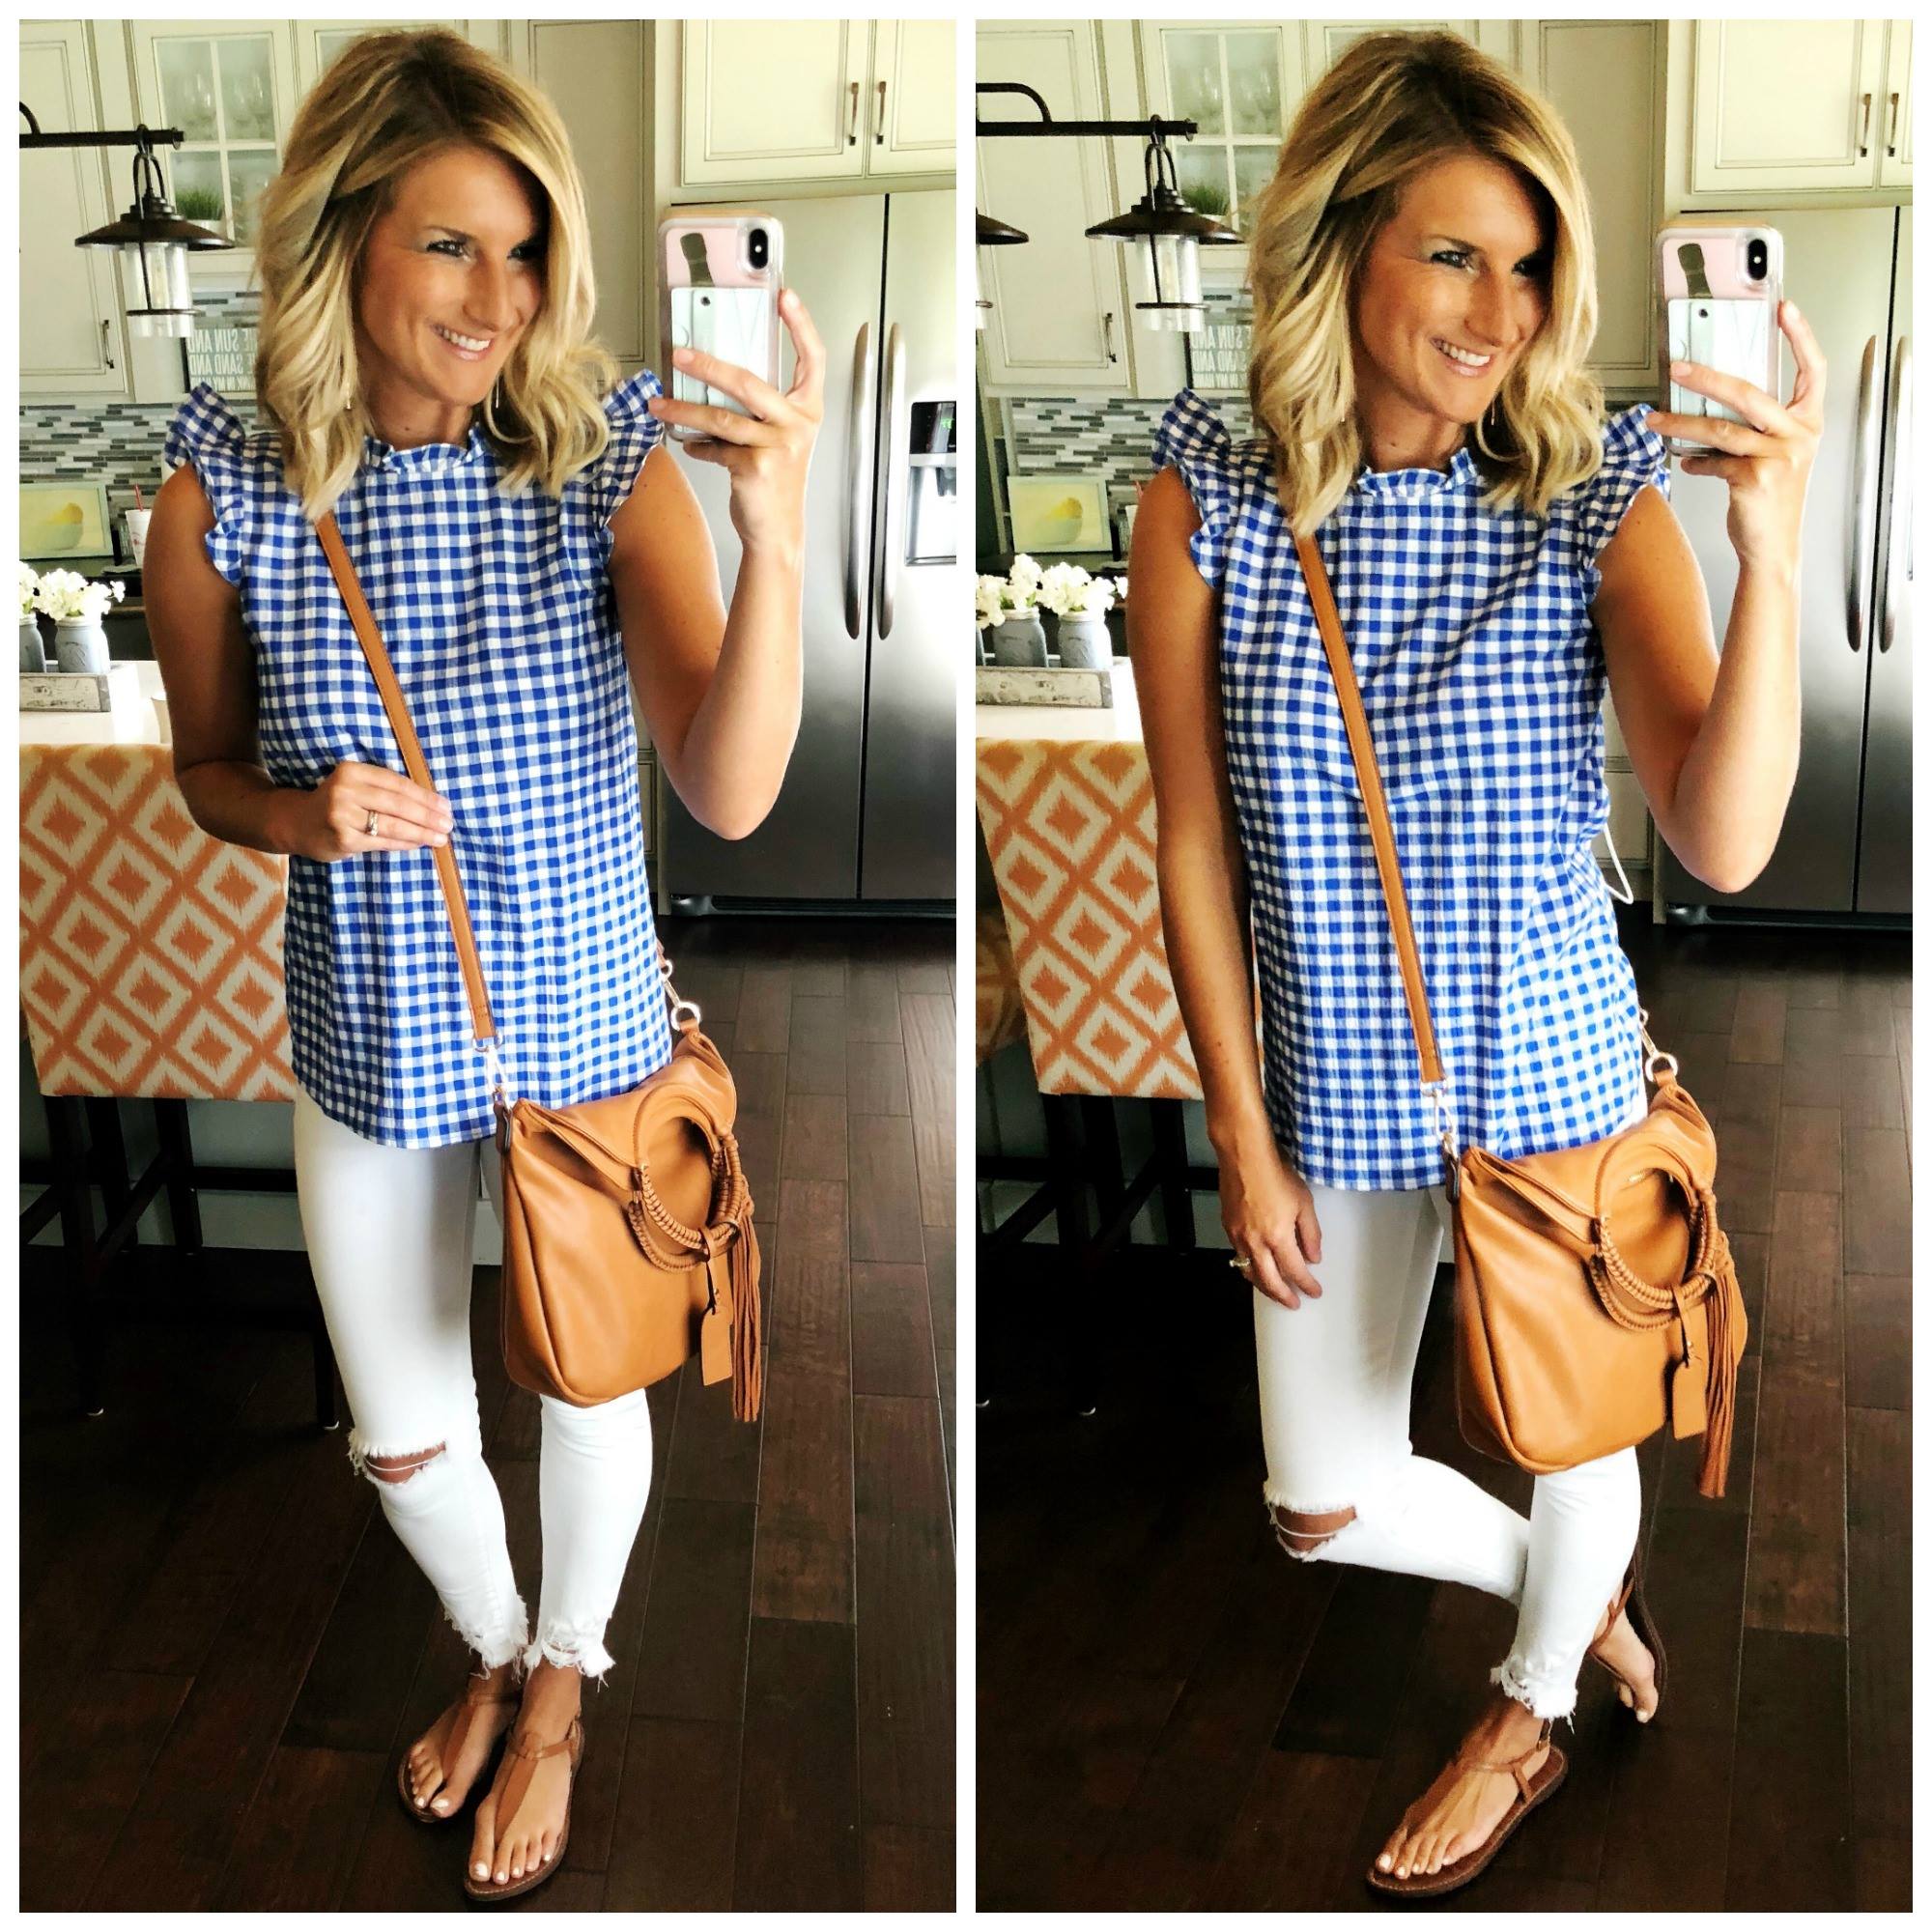 What to Wear with White Jeans in the Summer // Non Sheer White Jeans // Gingham Top with White Jeans with Sandals // Cute Summer Outfit // Summer Fashion // Foldover Tote